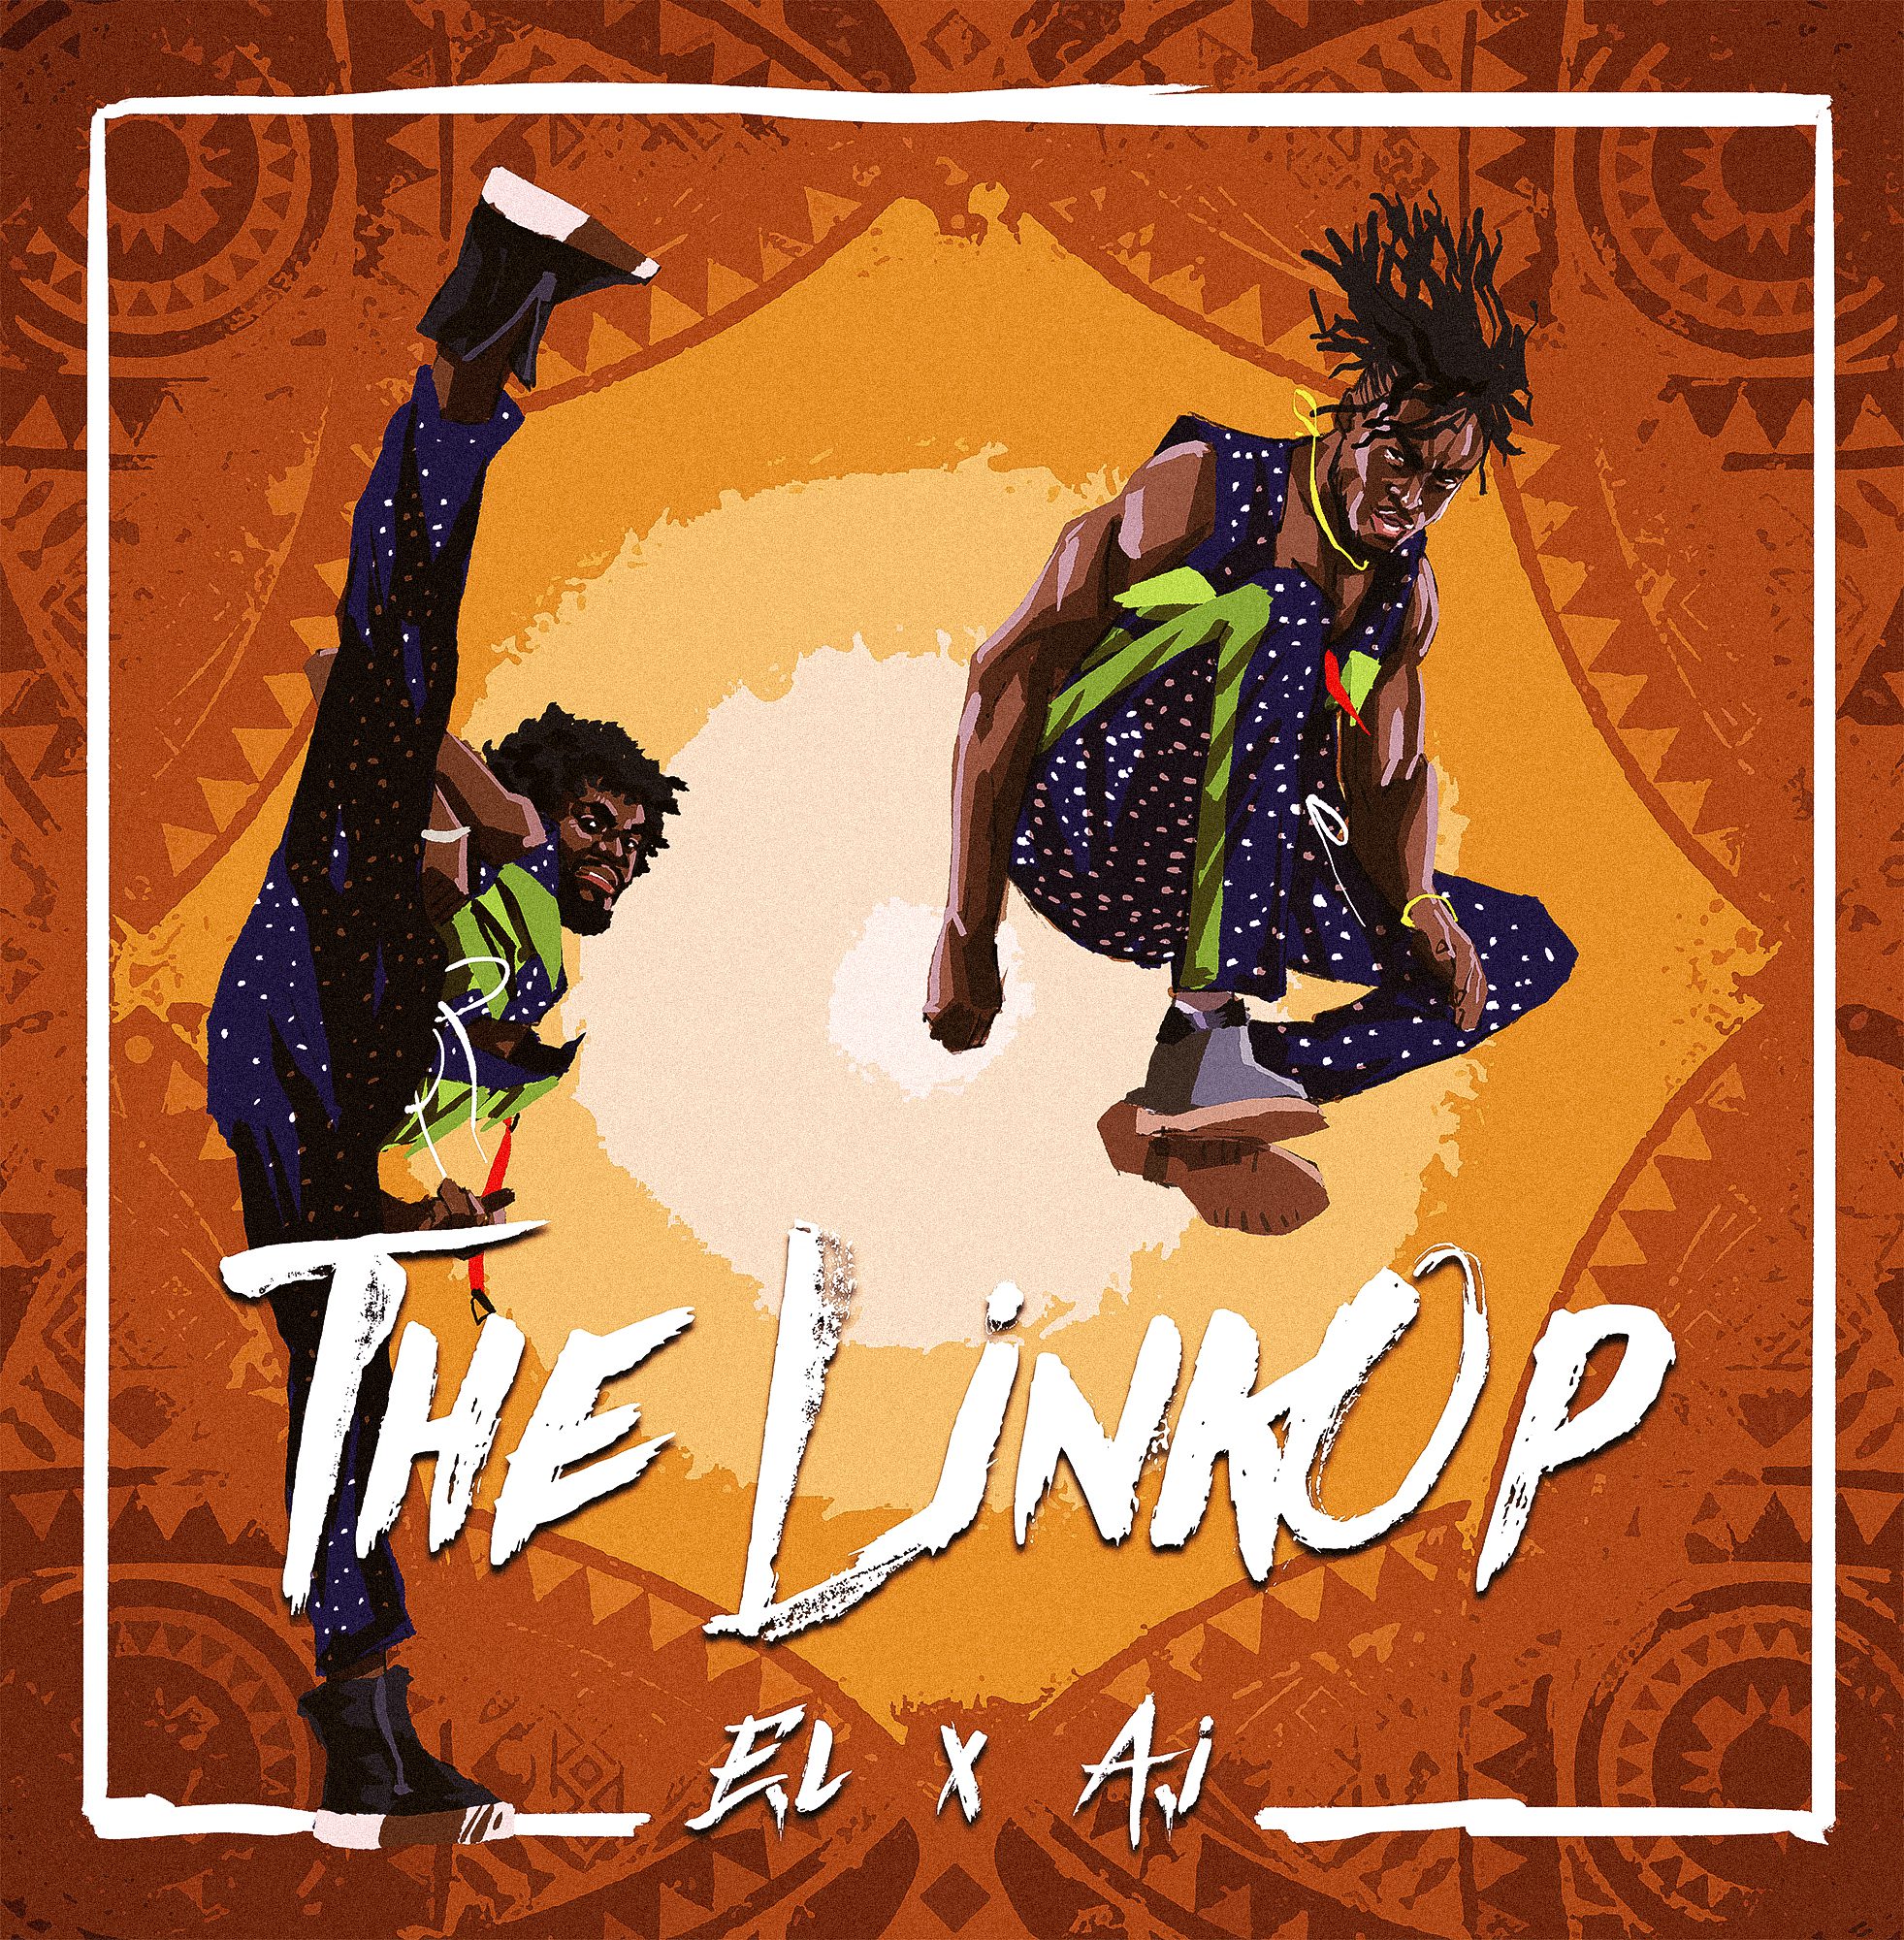 The Real Story Behind E.L & A.I.’s Joint EP – “The Linkop”.